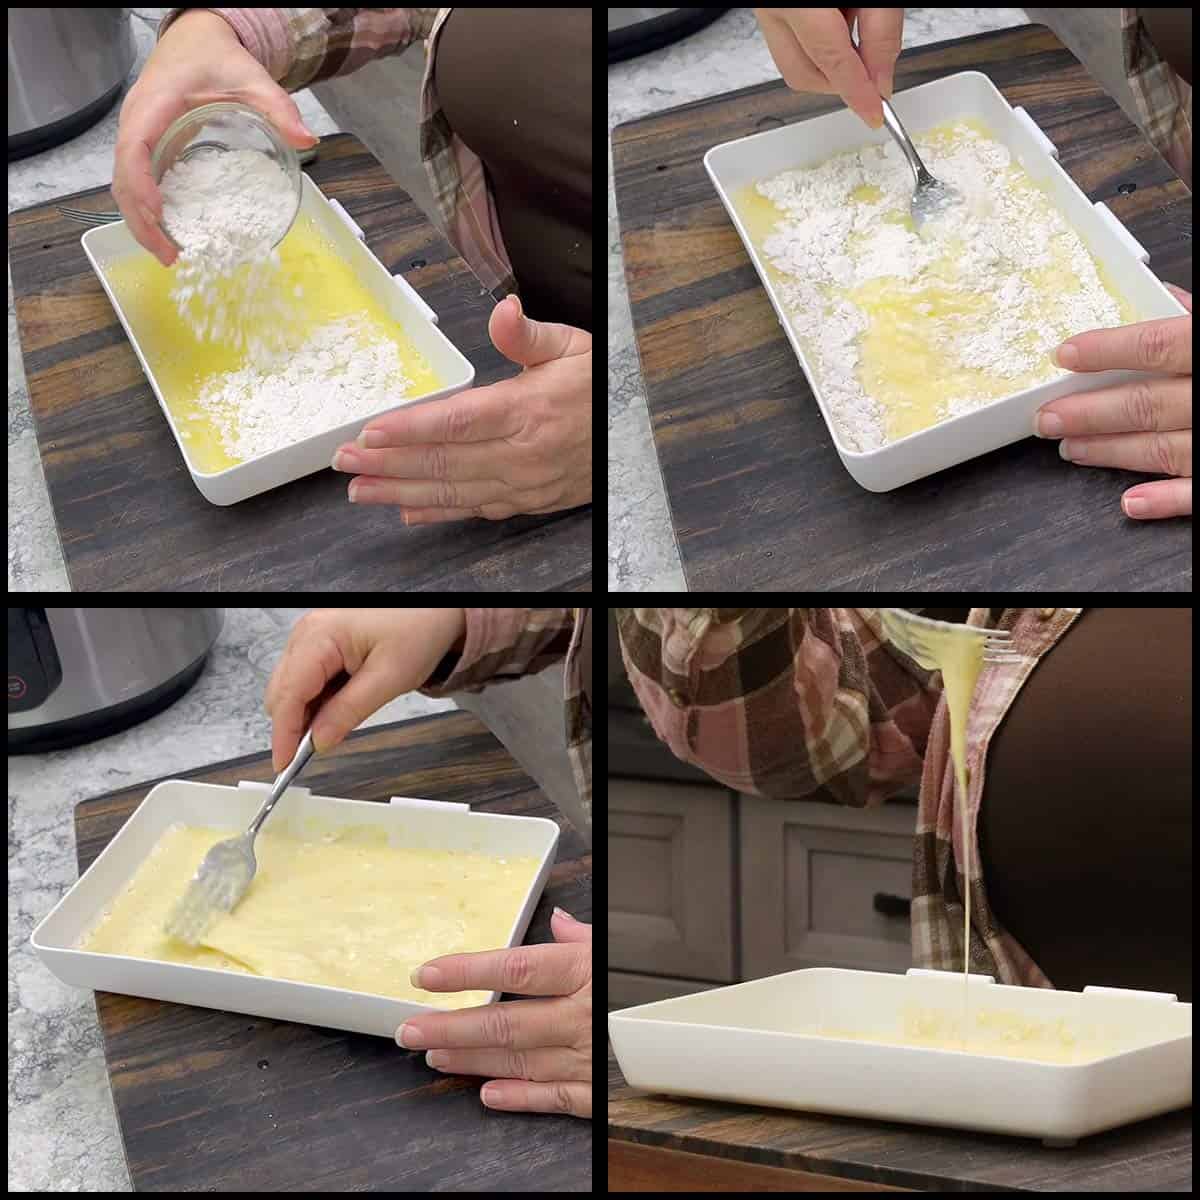 mixing the flour into the wet ingredients to create a thin batter.